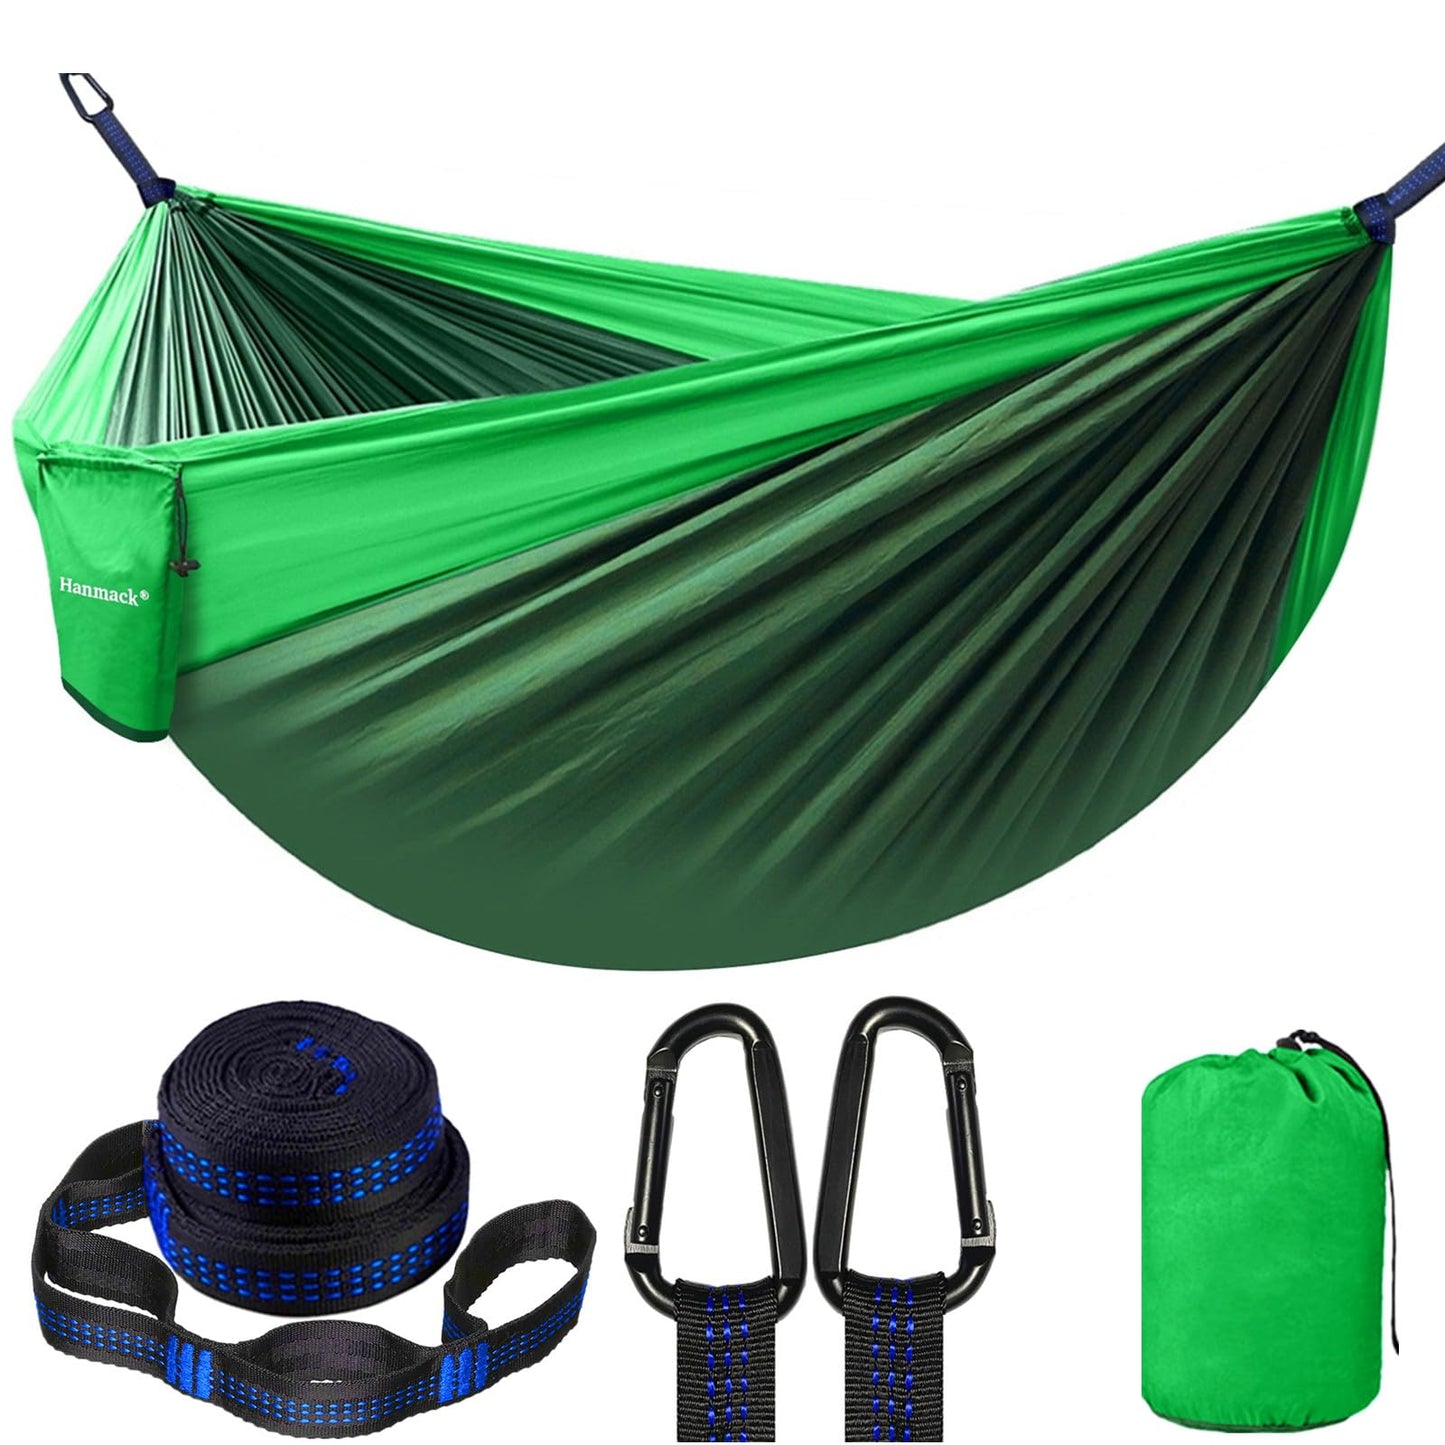 (Dark Green) - Camping Hammock, Double Hammock with 2 Tree Straps(16+2 Loops), Two Person Hammocks with 210T Parachute Nylon for Backpacking, Outdoor, Beach, Travel, Hiking, Garden, Lightweight Por...